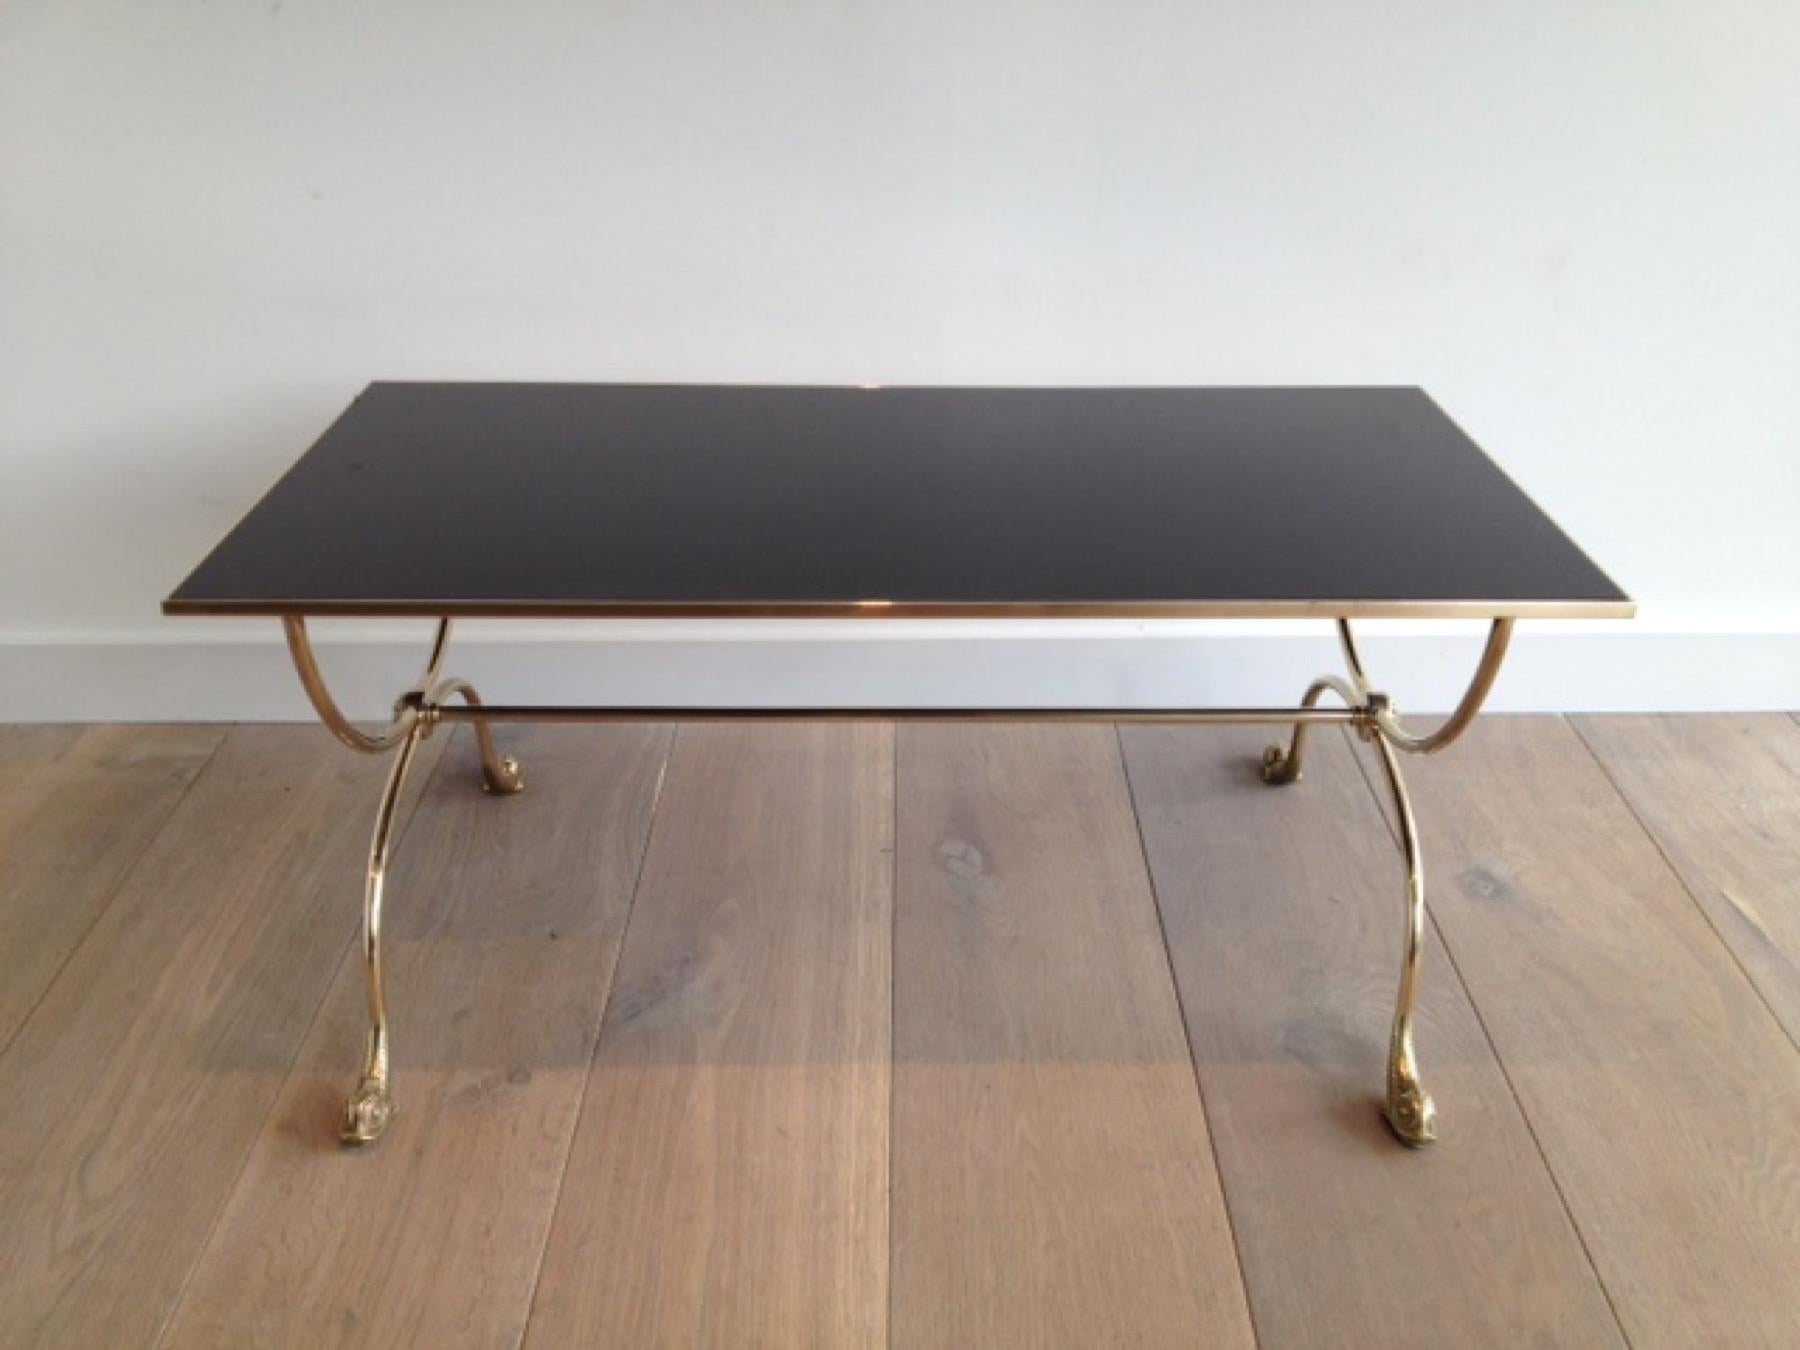 This coffee table with dolphin heads is made of brass with a black lacquered glass top. This is a French work by famous French designer Maison Jansen. Circa 1940.